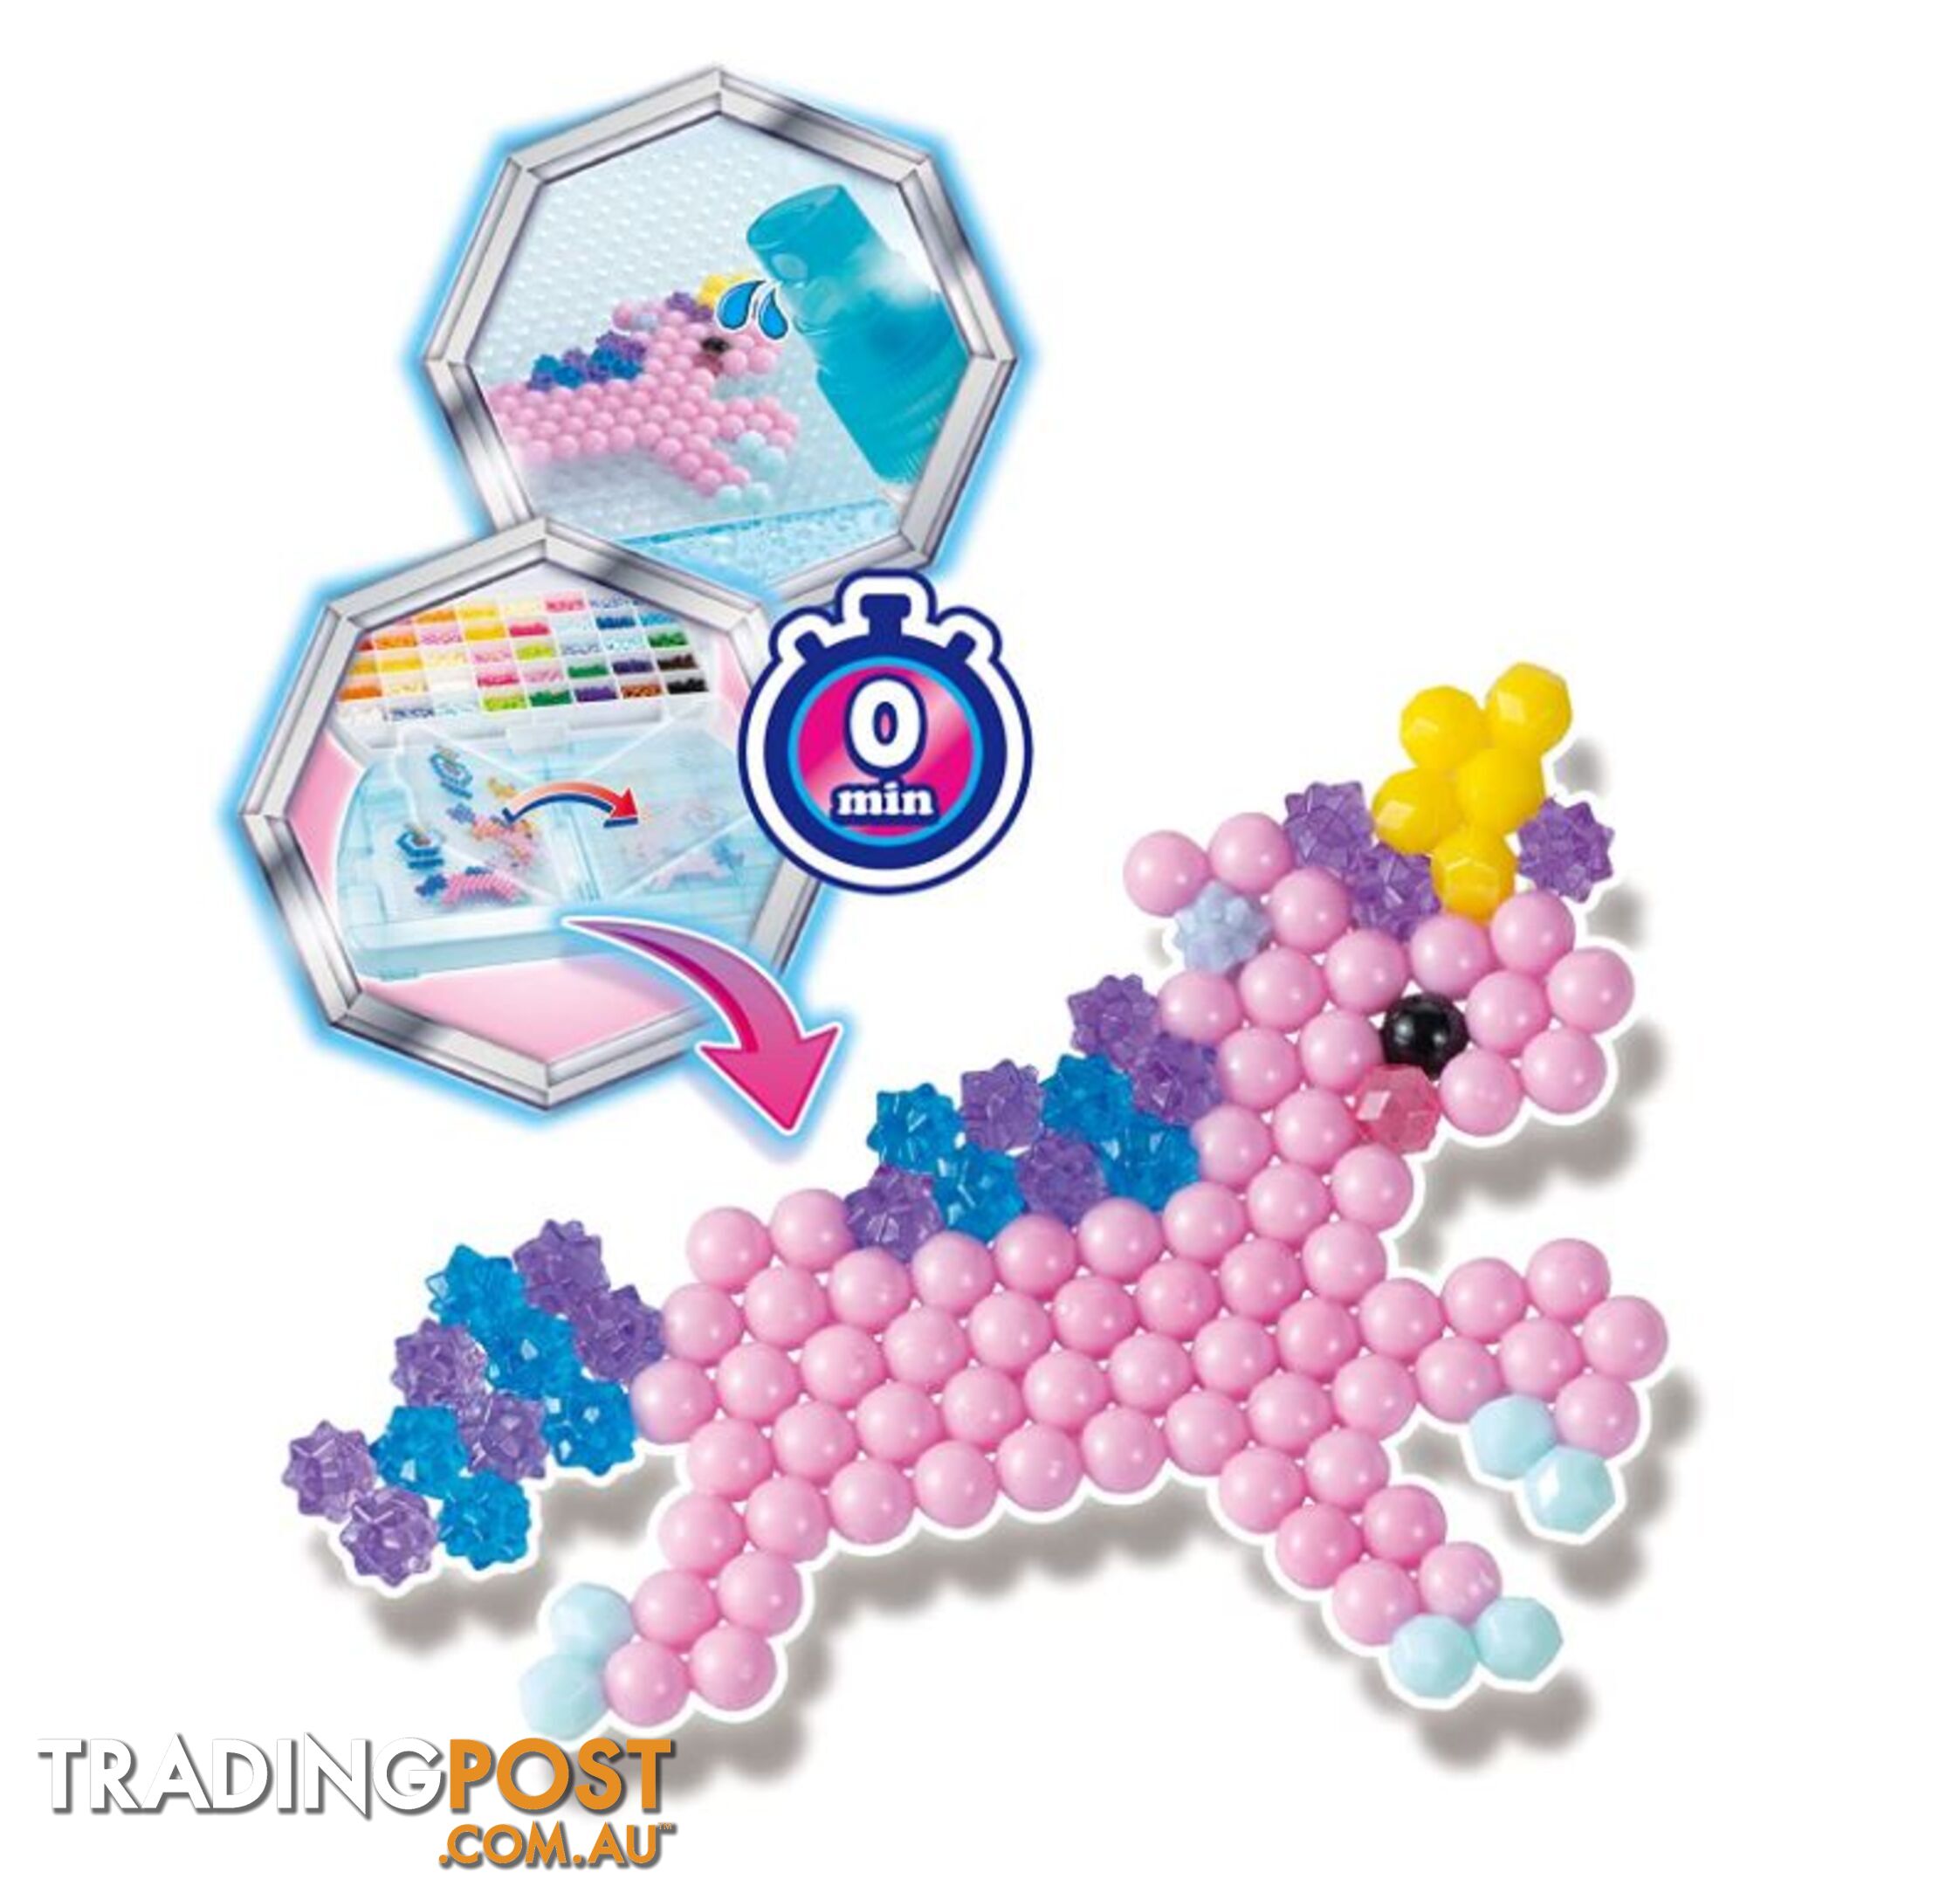 Aquabeads - Deluxe Carry Case - Mdaq31914 - 5054131319147